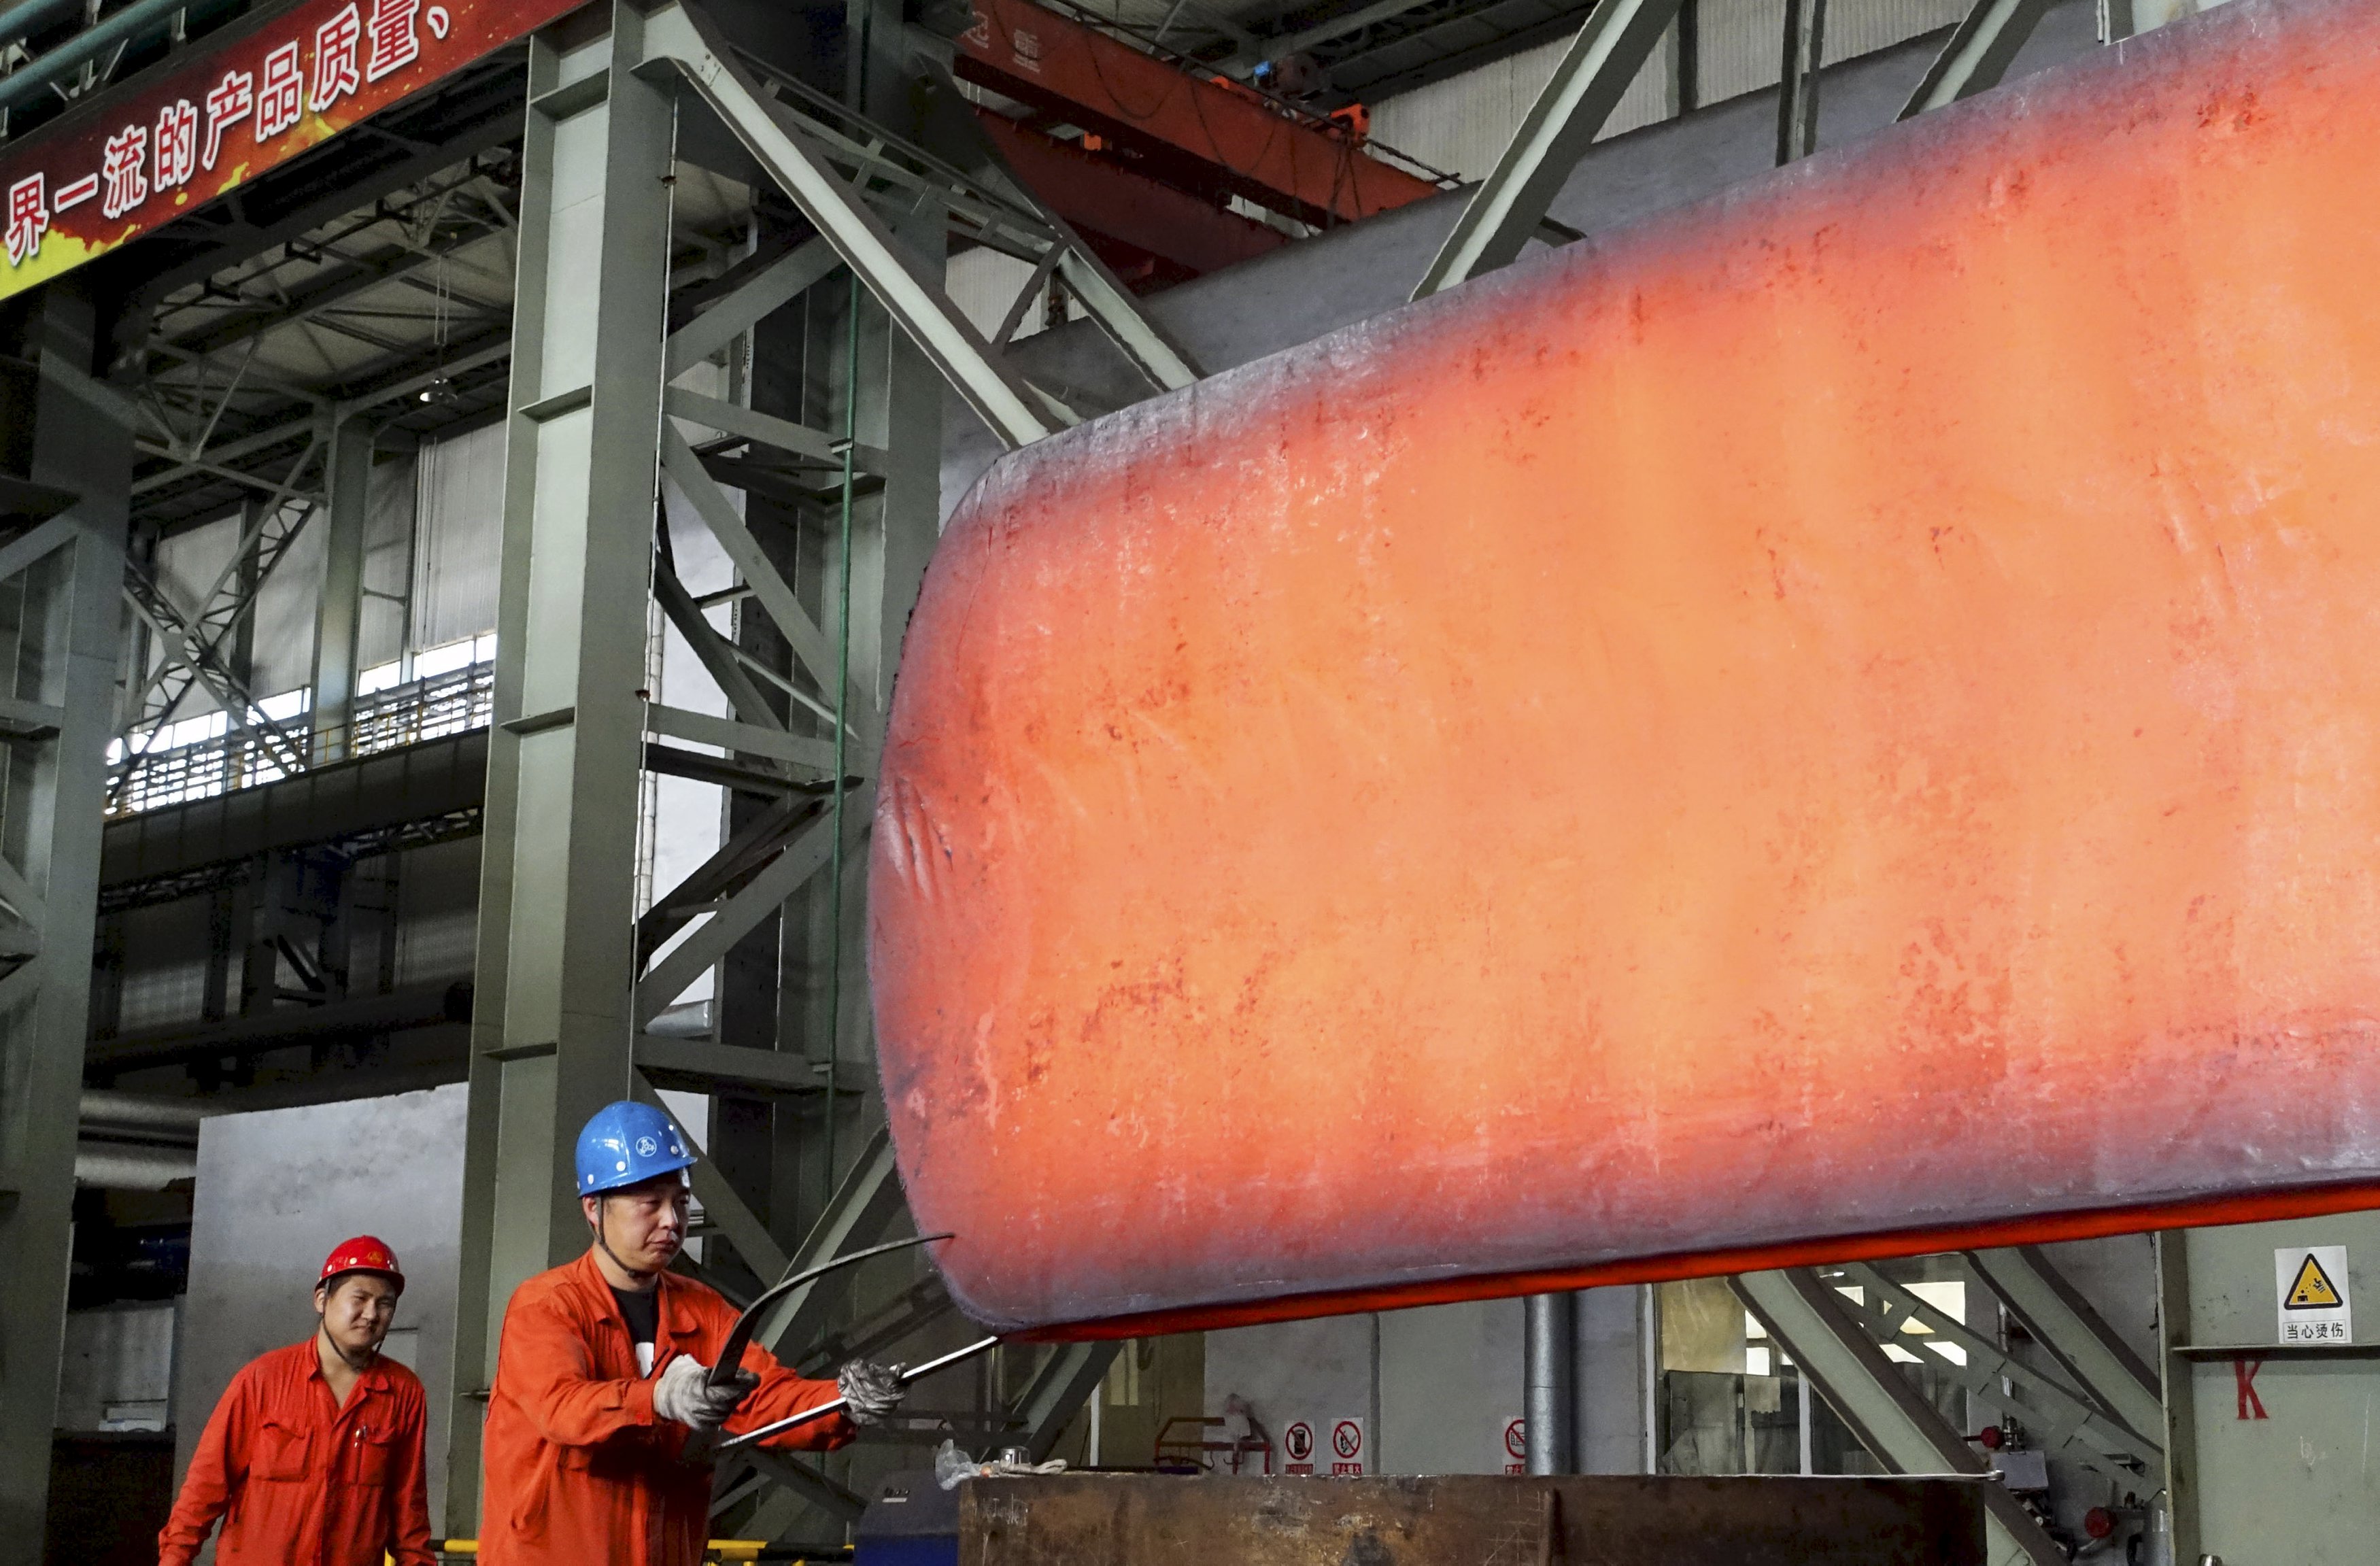 A worker measures a newly-made steel block at a factory of Dongbei Special Steel Group Co., Ltd., in Dalian, Liaoning province, China, October 13, 2015. China's economic growth is expected to fall below 7 percent for the first time since the global financial crisis in the third quarter, putting pressure on policymakers to roll out more support measures as fears of a sharper slowdown spook investors. Picture taken October 13, 2015. REUTERS/China Daily CHINA OUT. NO COMMERCIAL OR EDITORIAL SALES IN CHINA. TPX IMAGES OF THE DAY.